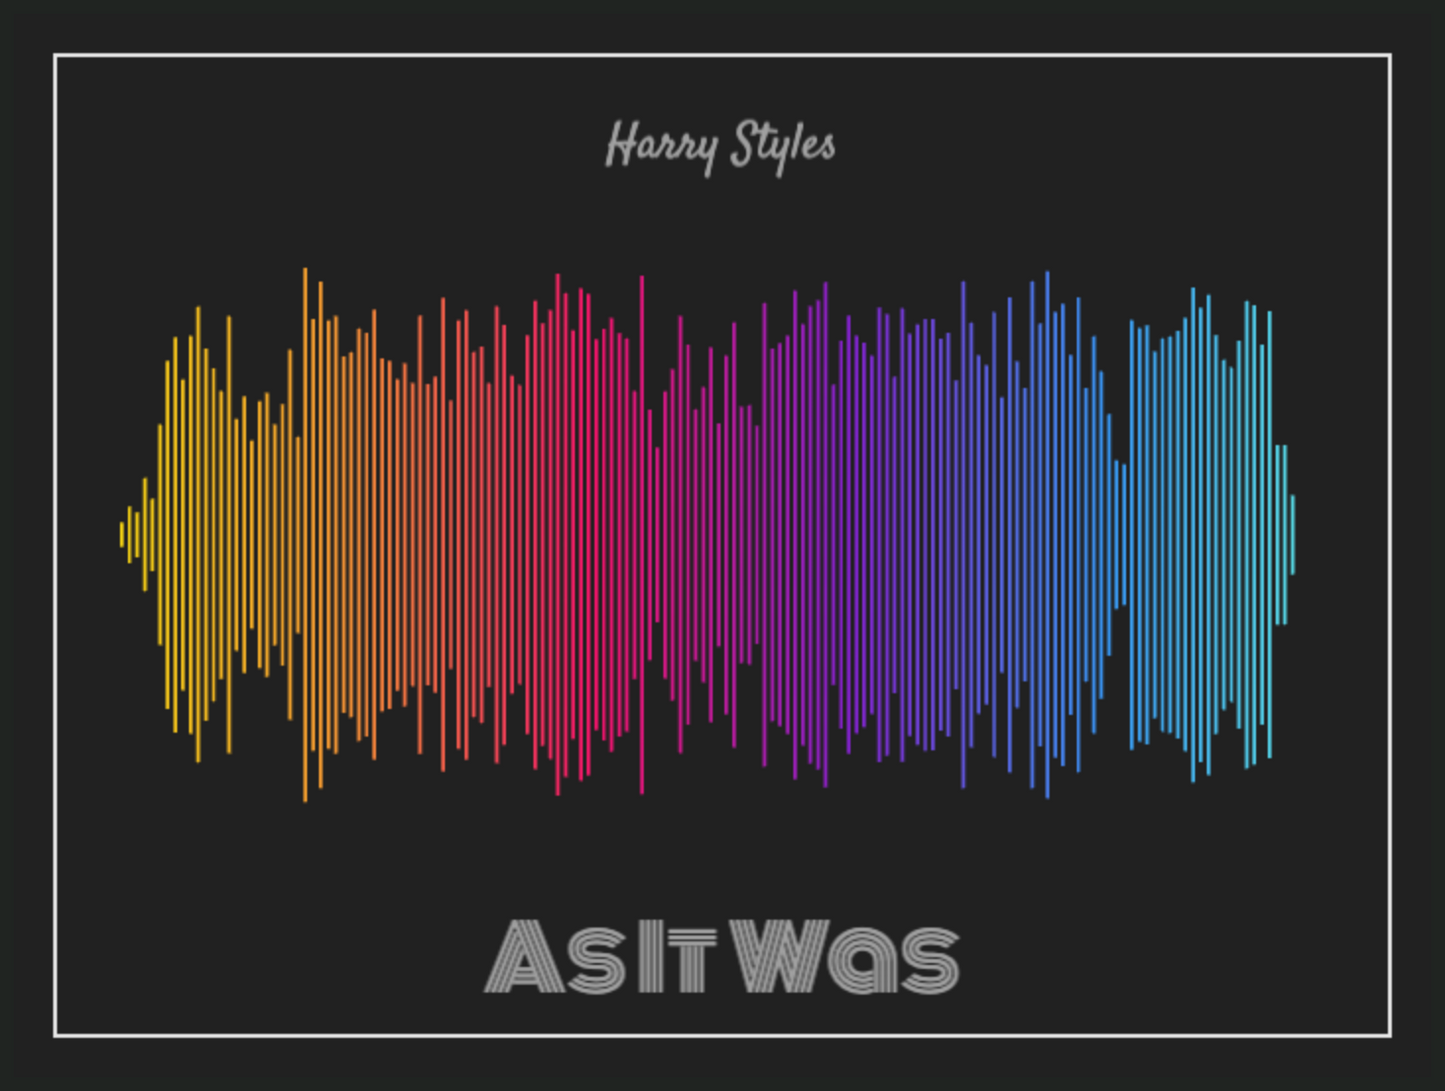 Harry Styles 'As It Was' Soundwave Poster - Rainbow Colors on Dark Gray Background